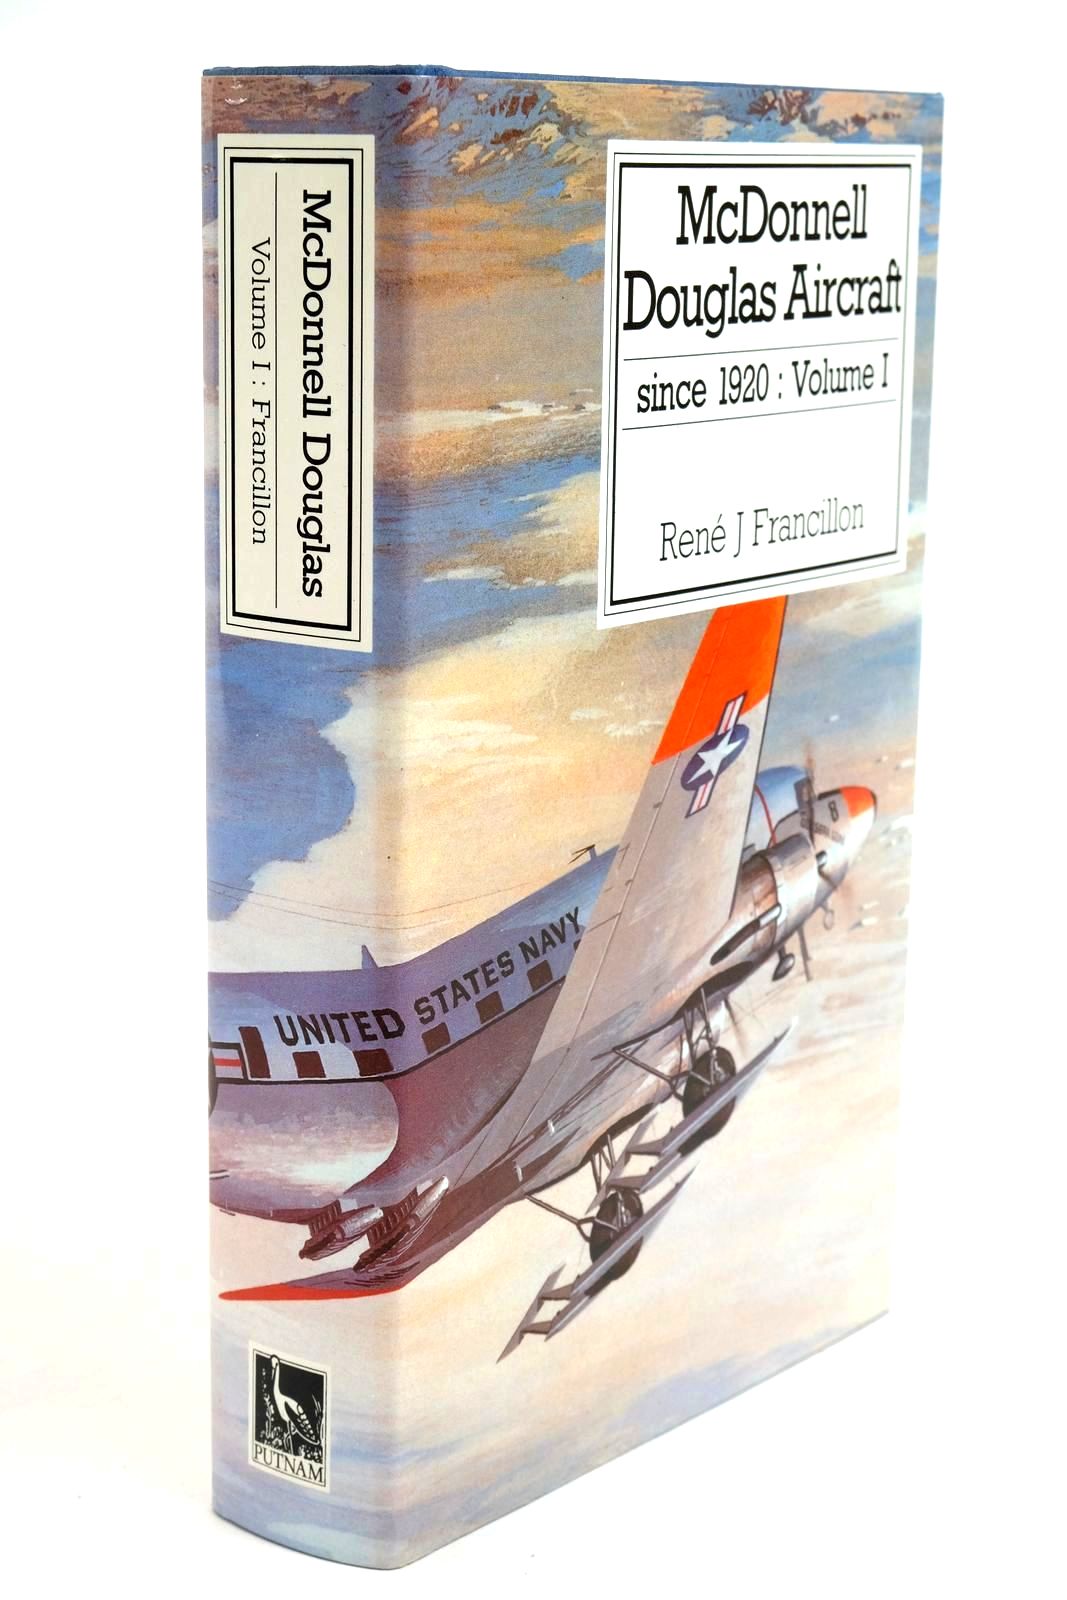 Photo of MCDONNELL DOUGLAS AIRCRAFT SINCE 1920: VOLUME I written by Francillon, Rene J. published by Putnam (STOCK CODE: 1321919)  for sale by Stella & Rose's Books